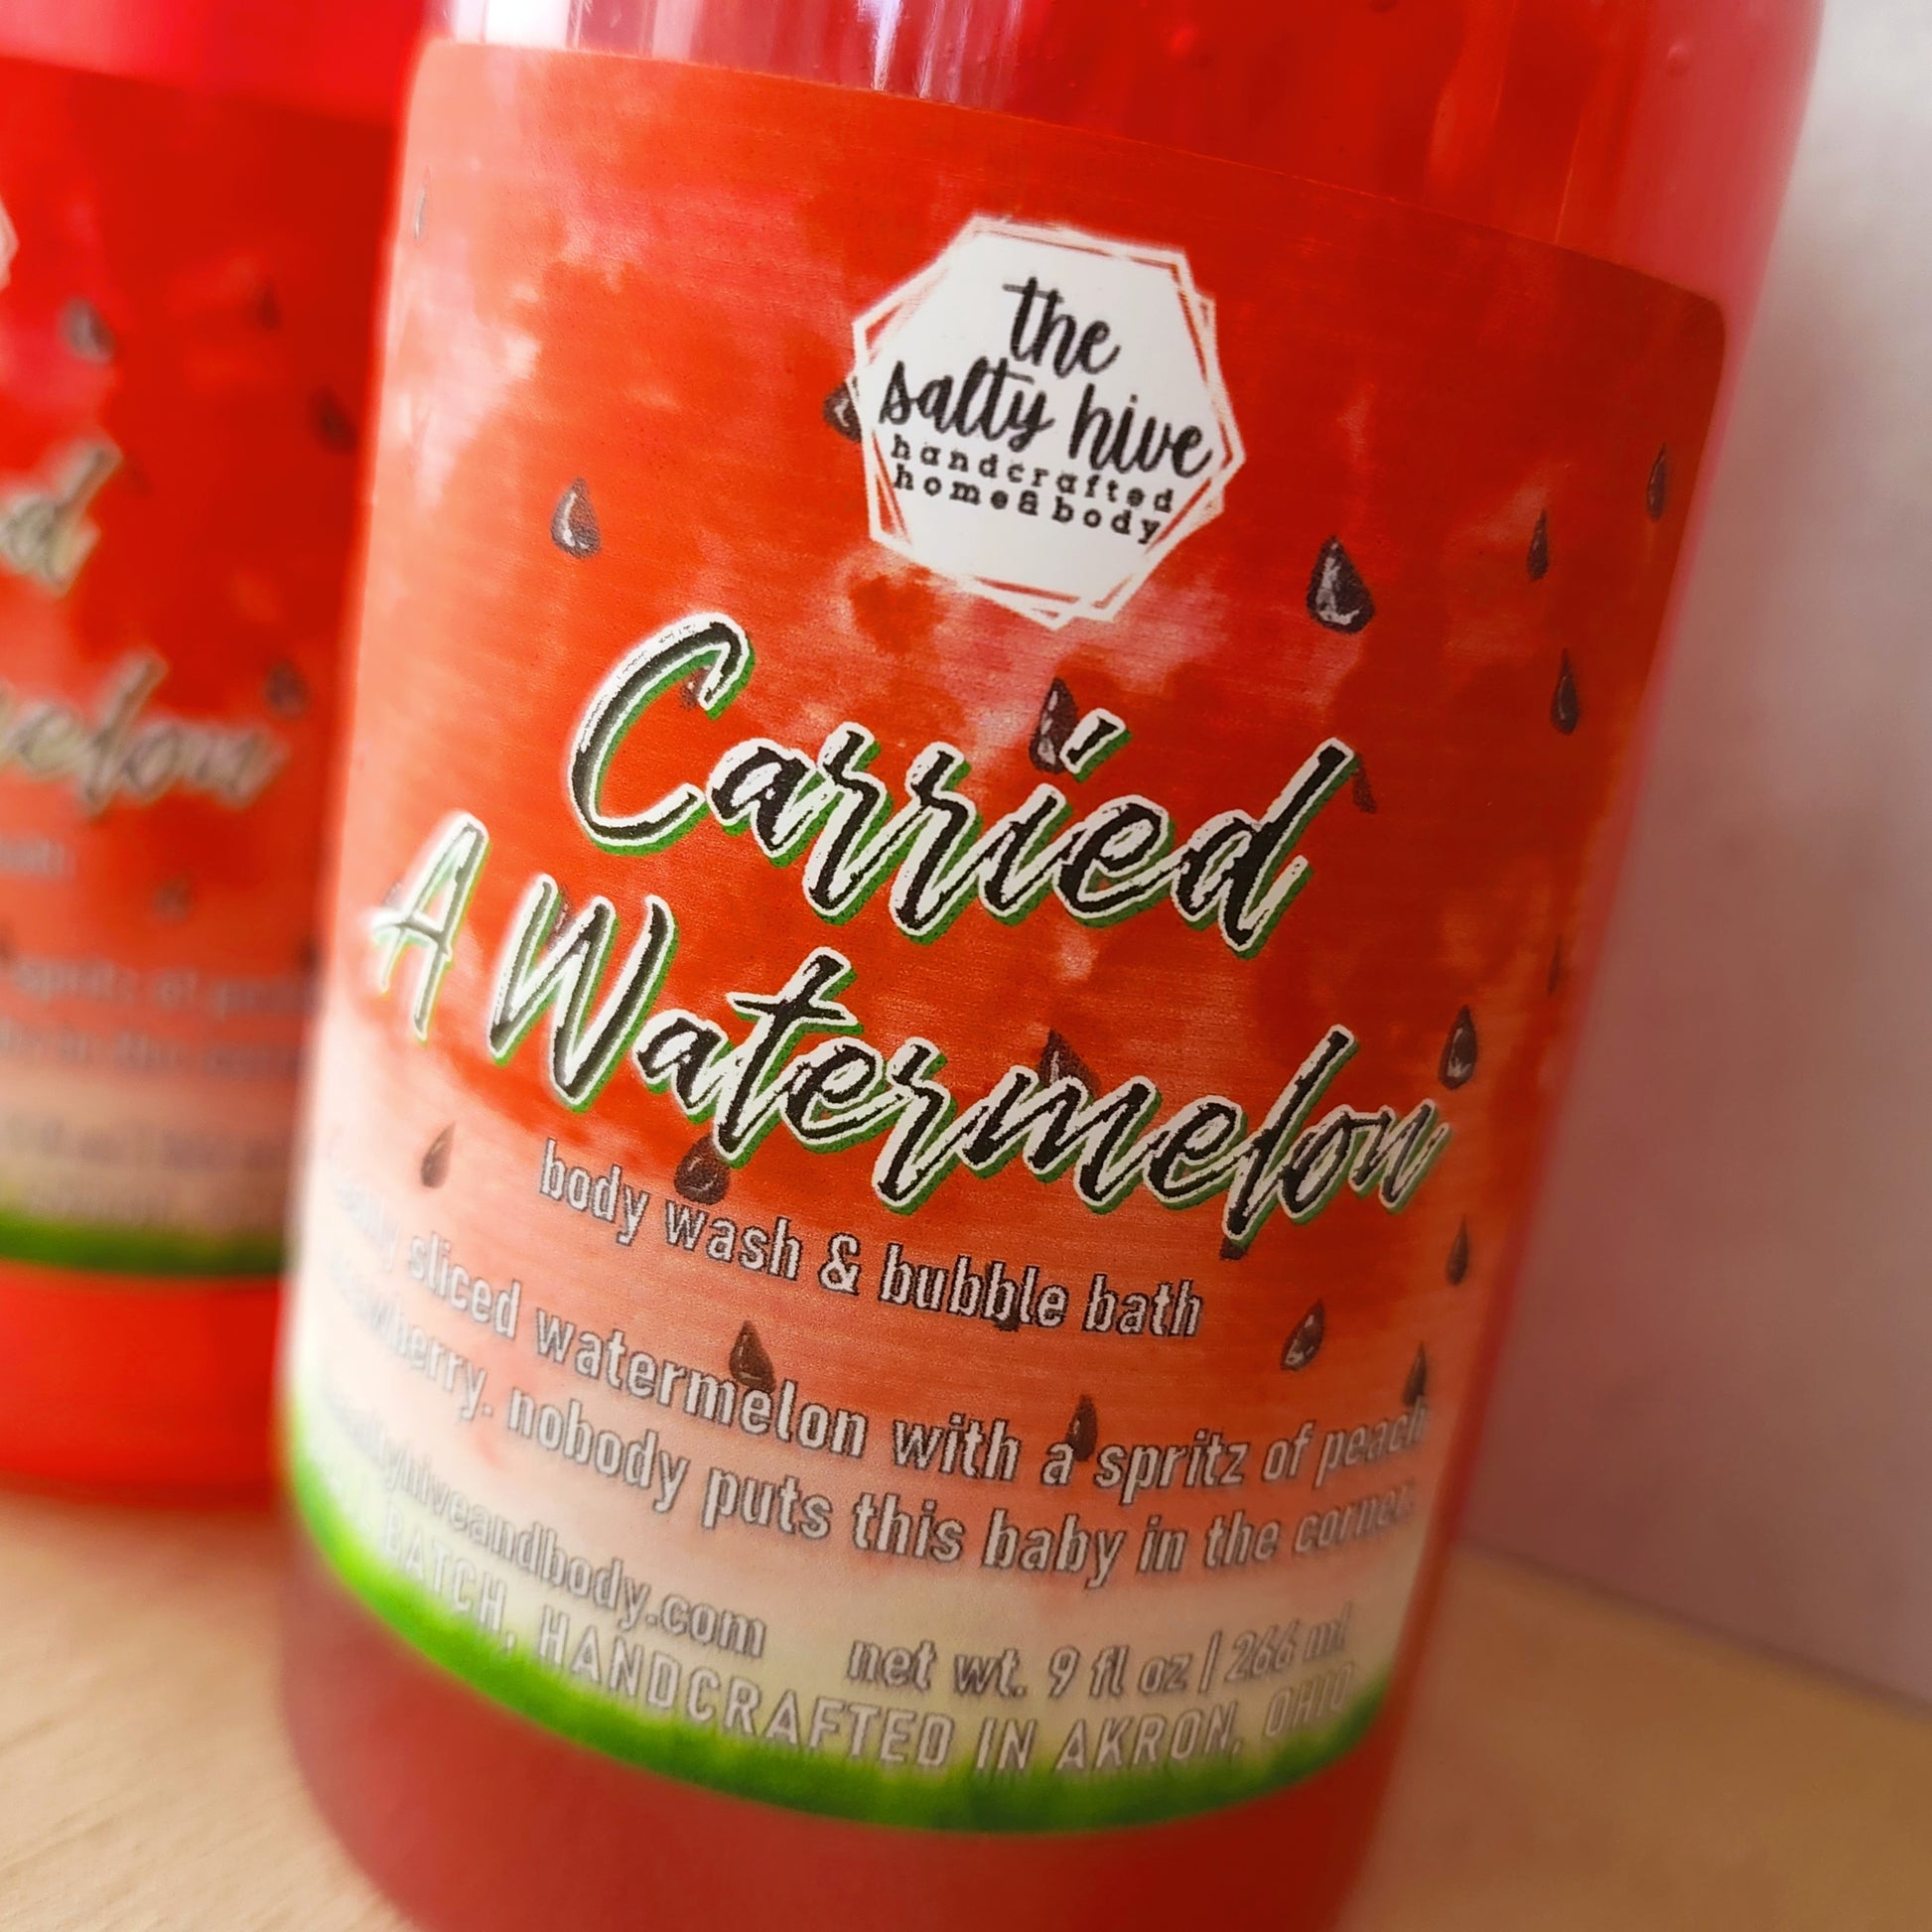 carried a watermelon body wash & bubble bath - the salty hive